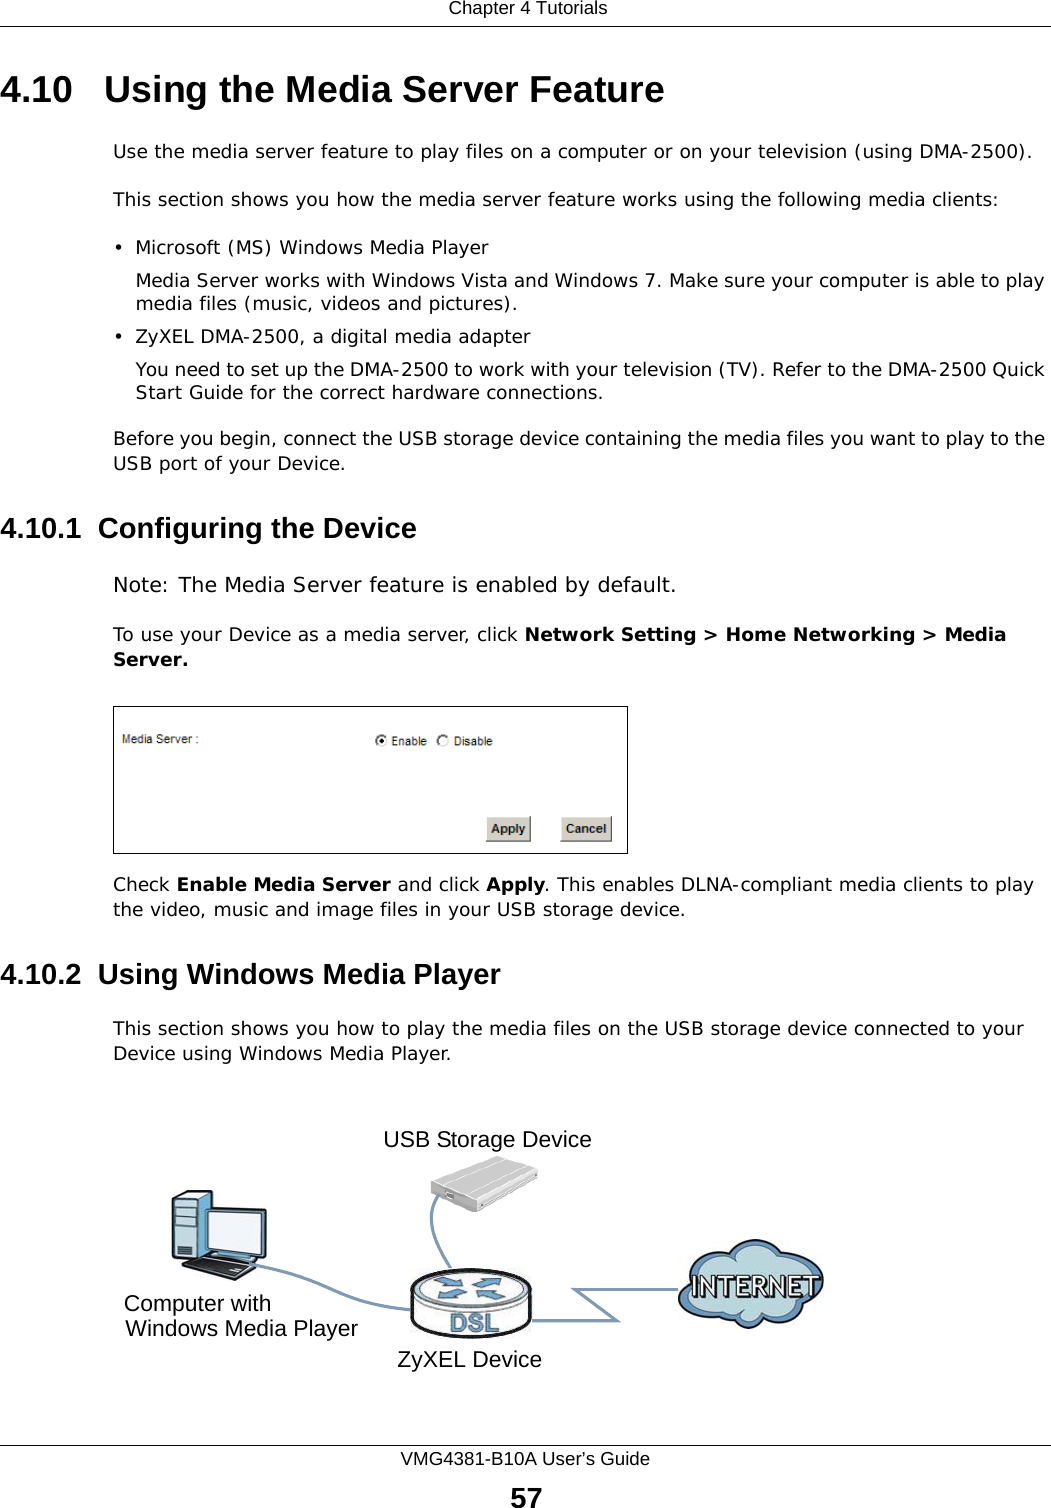  Chapter 4 TutorialsVMG4381-B10A User’s Guide574.10   Using the Media Server FeatureUse the media server feature to play files on a computer or on your television (using DMA-2500).This section shows you how the media server feature works using the following media clients: • Microsoft (MS) Windows Media Player Media Server works with Windows Vista and Windows 7. Make sure your computer is able to play media files (music, videos and pictures). • ZyXEL DMA-2500, a digital media adapterYou need to set up the DMA-2500 to work with your television (TV). Refer to the DMA-2500 Quick Start Guide for the correct hardware connections. Before you begin, connect the USB storage device containing the media files you want to play to the USB port of your Device.4.10.1  Configuring the DeviceNote: The Media Server feature is enabled by default. To use your Device as a media server, click Network Setting &gt; Home Networking &gt; Media Server.Tutorial: USB  Services &gt; Media ServerCheck Enable Media Server and click Apply. This enables DLNA-compliant media clients to play the video, music and image files in your USB storage device.4.10.2  Using Windows Media PlayerThis section shows you how to play the media files on the USB storage device connected to your Device using Windows Media Player. Tutorial: Media Server Setup (Using Windows Media Player)Computer withZyXEL DeviceUSB Storage DeviceWindows Media Player